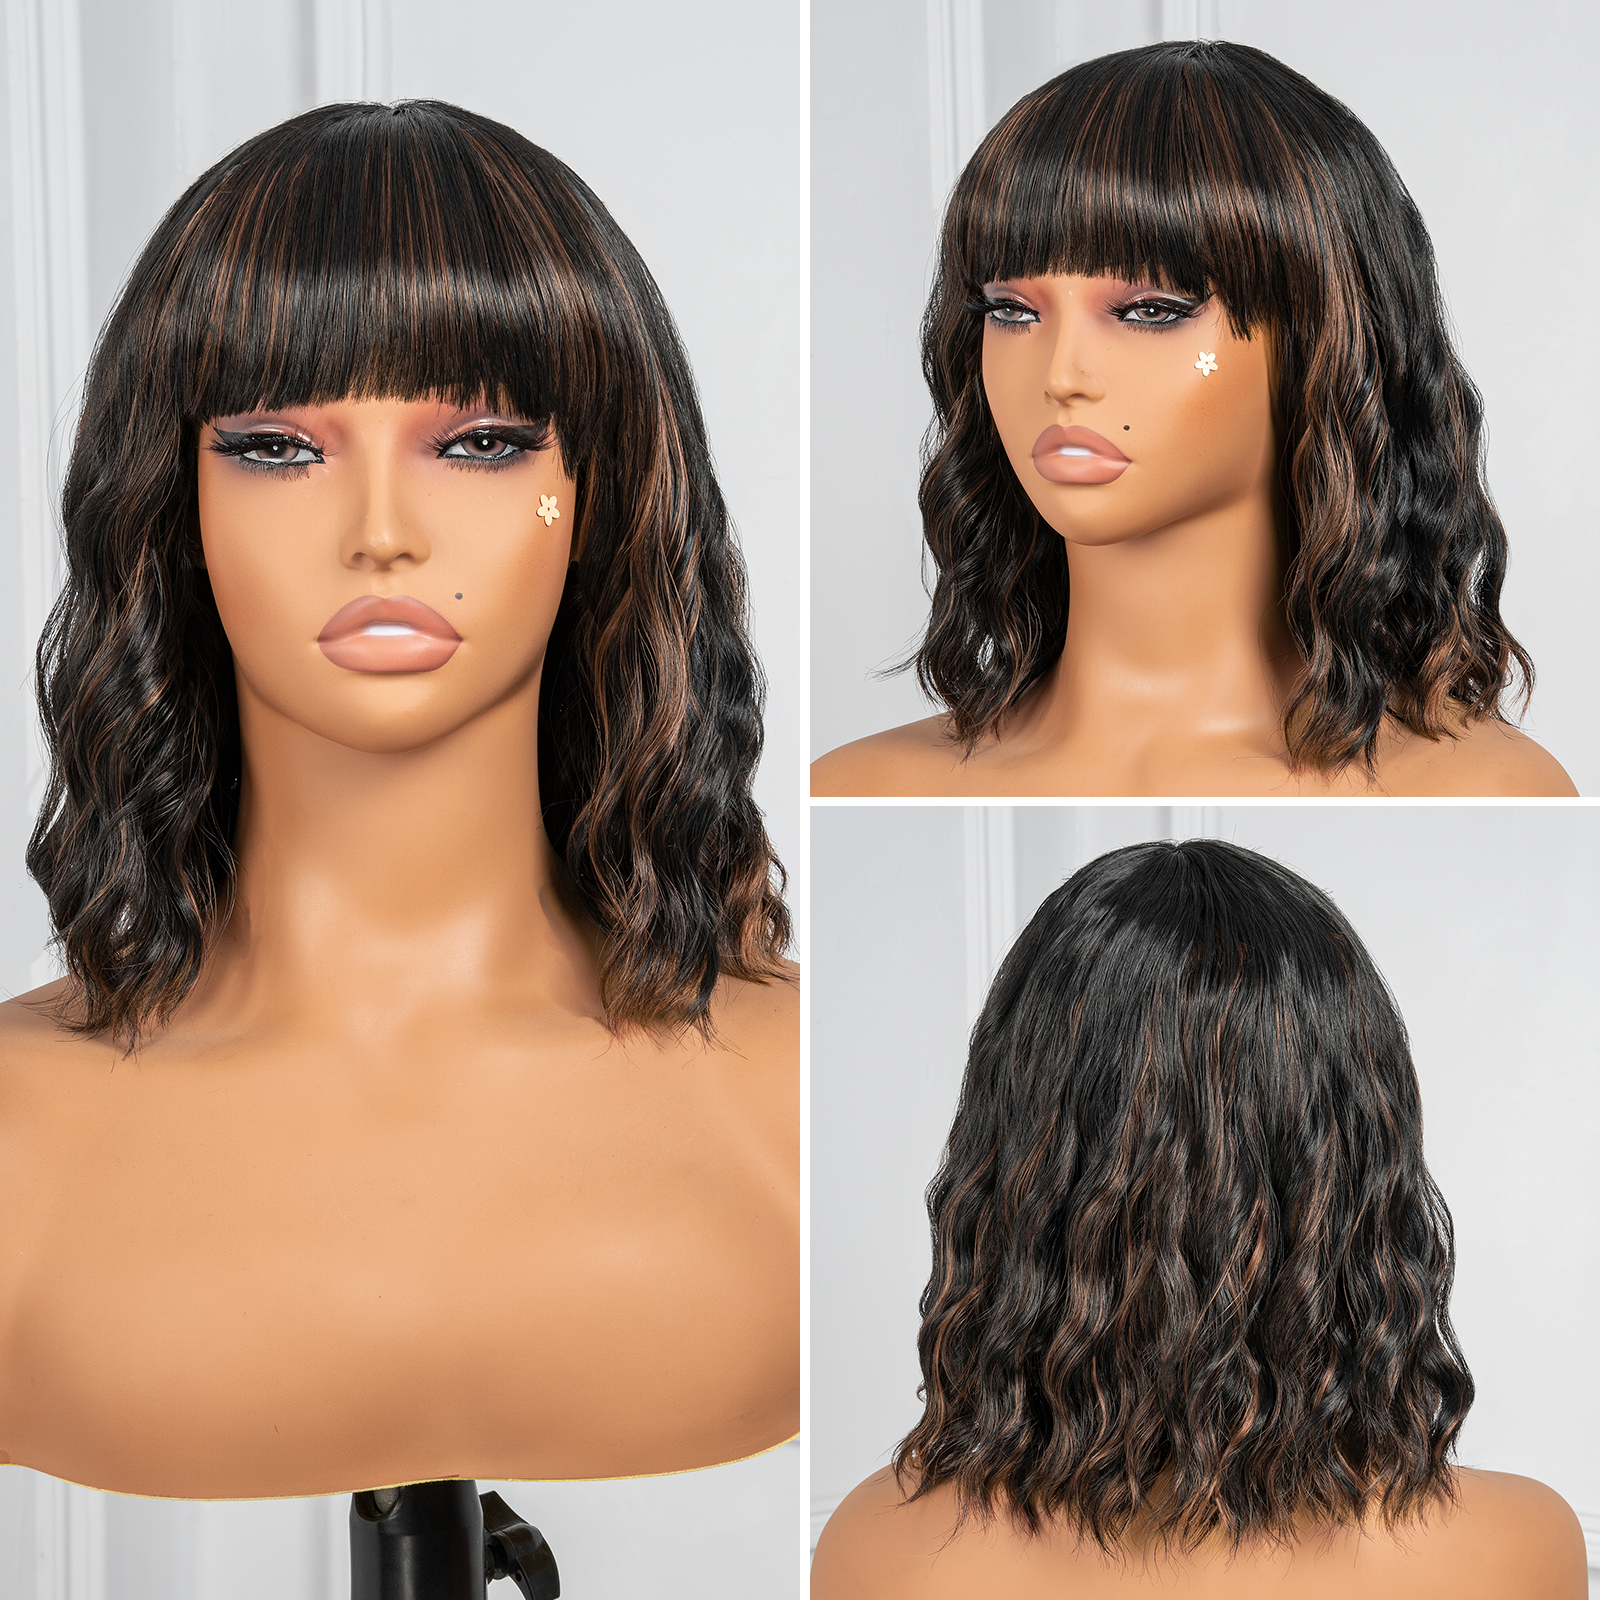 𝗣𝘂𝗺𝗽𝗸𝗶𝗻 𝗦𝗽𝗶𝗰𝗲 𝗧𝗿𝗲𝘀𝘀𝗲𝘀 | Toyotress Short Wavy Wigs With Bangs - 10 Inch Natural Black Bob Hair Wigs For Black Women, Shoulder Length Curly Synthetic Wigs(0925)